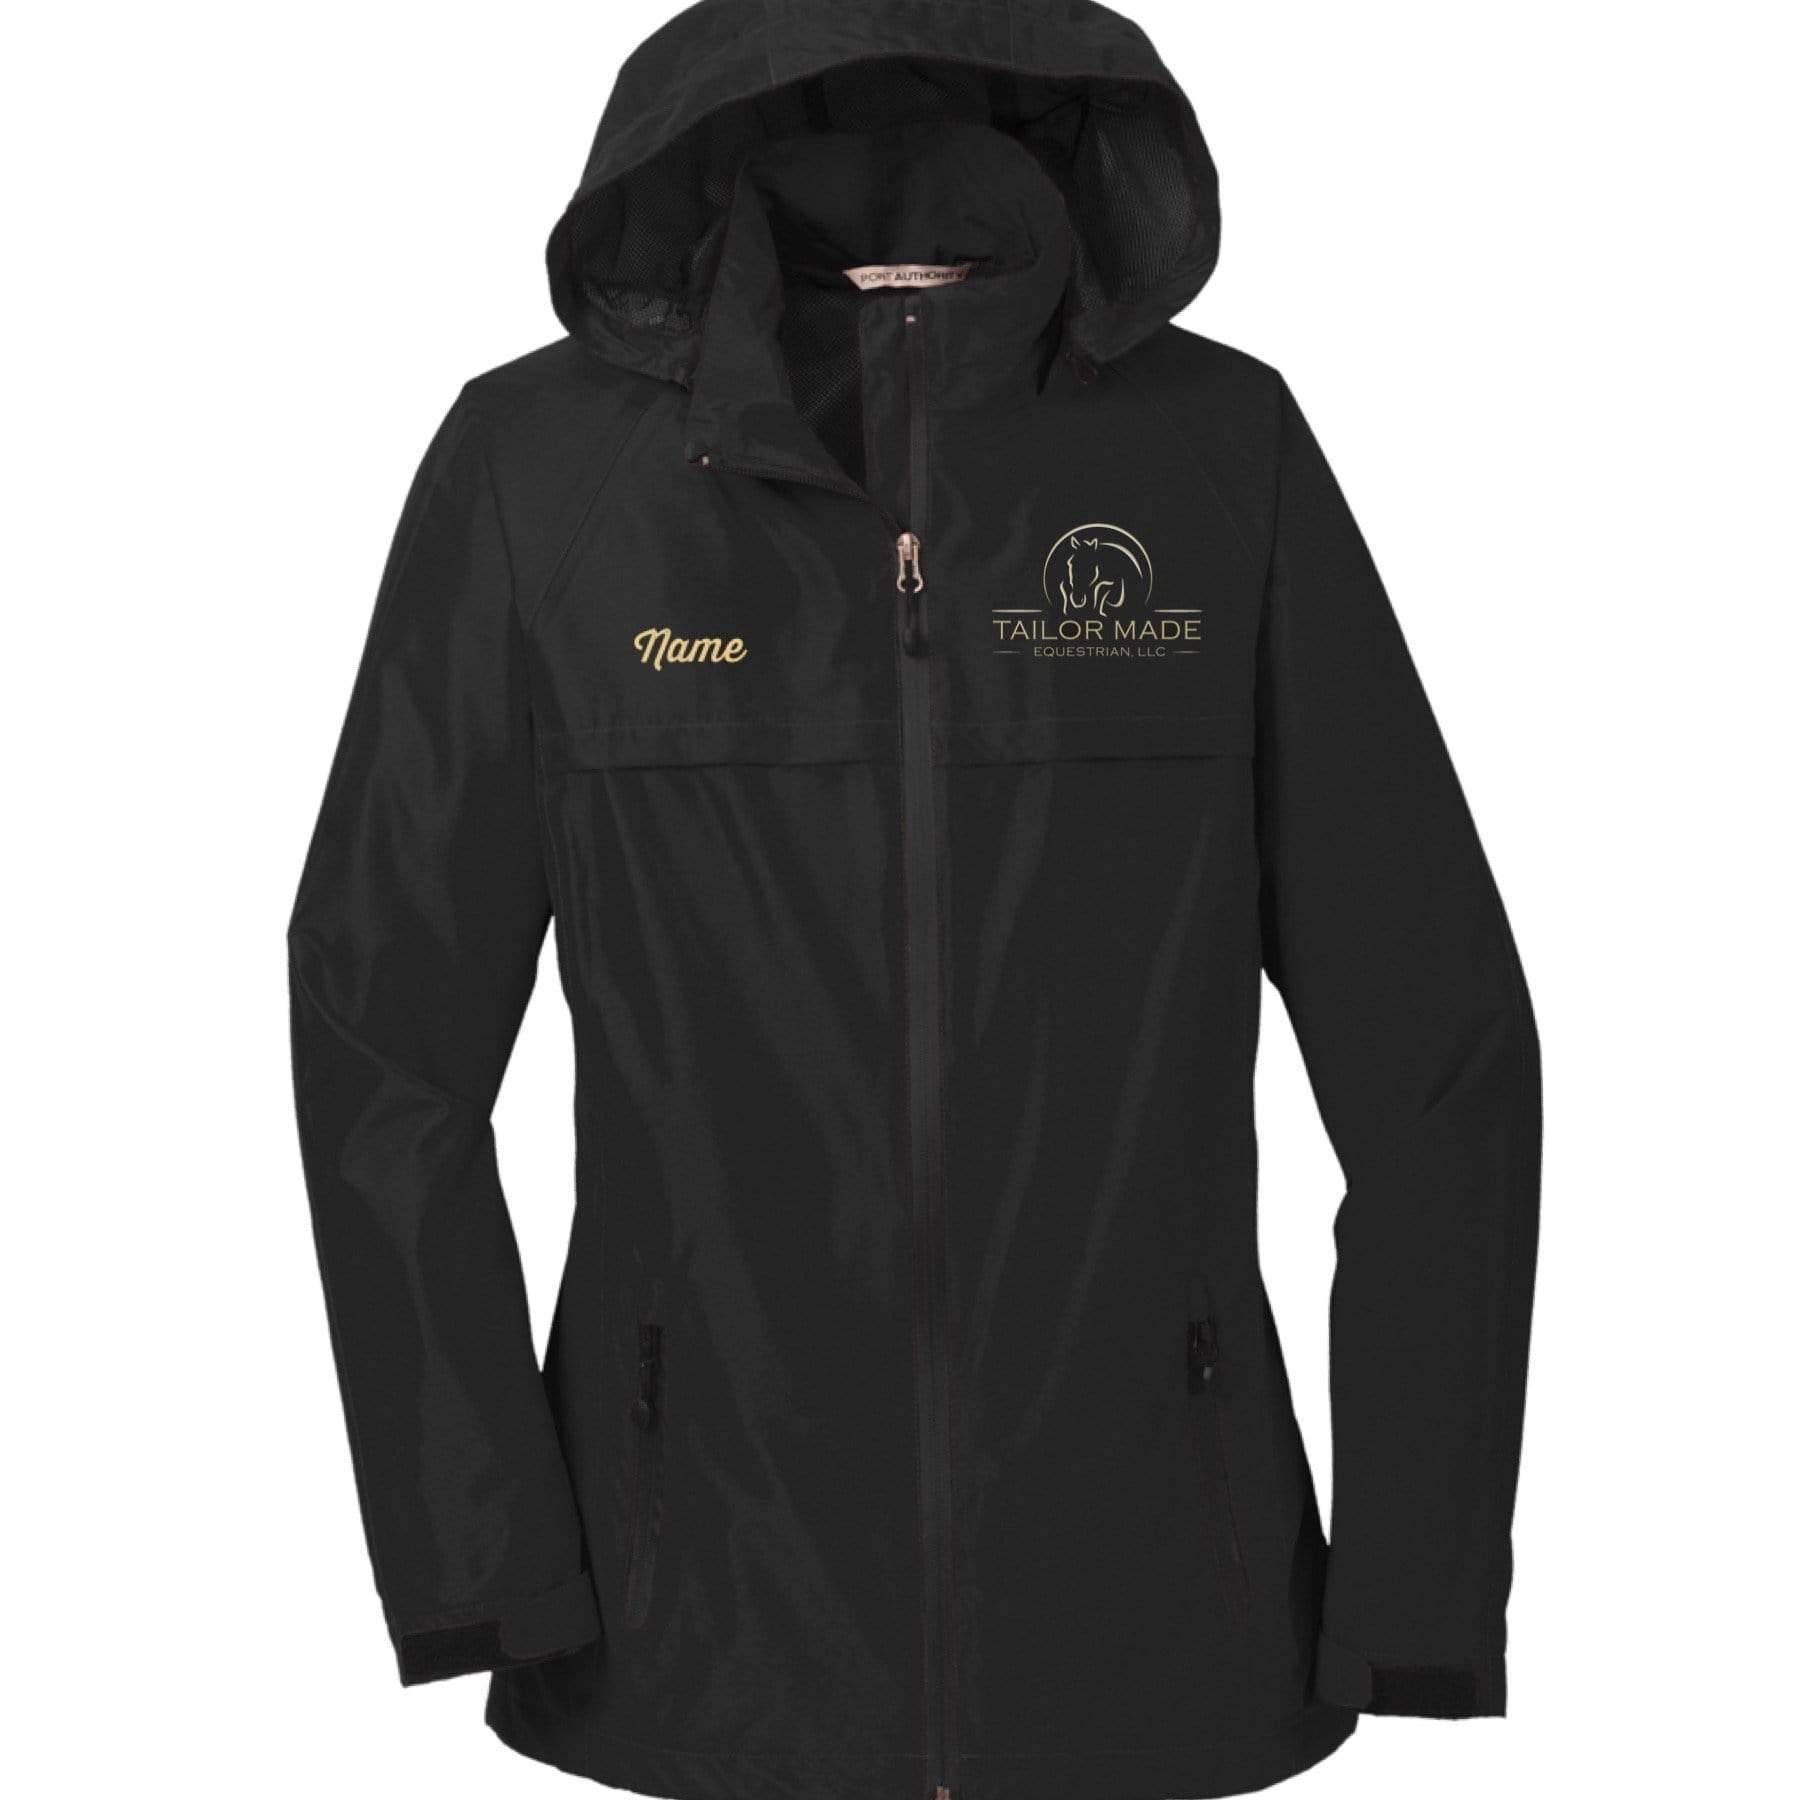 Equestrian Team Apparel Tailor Made Equestrian Rain Coat equestrian team apparel online tack store mobile tack store custom farm apparel custom show stable clothing equestrian lifestyle horse show clothing riding clothes horses equestrian tack store